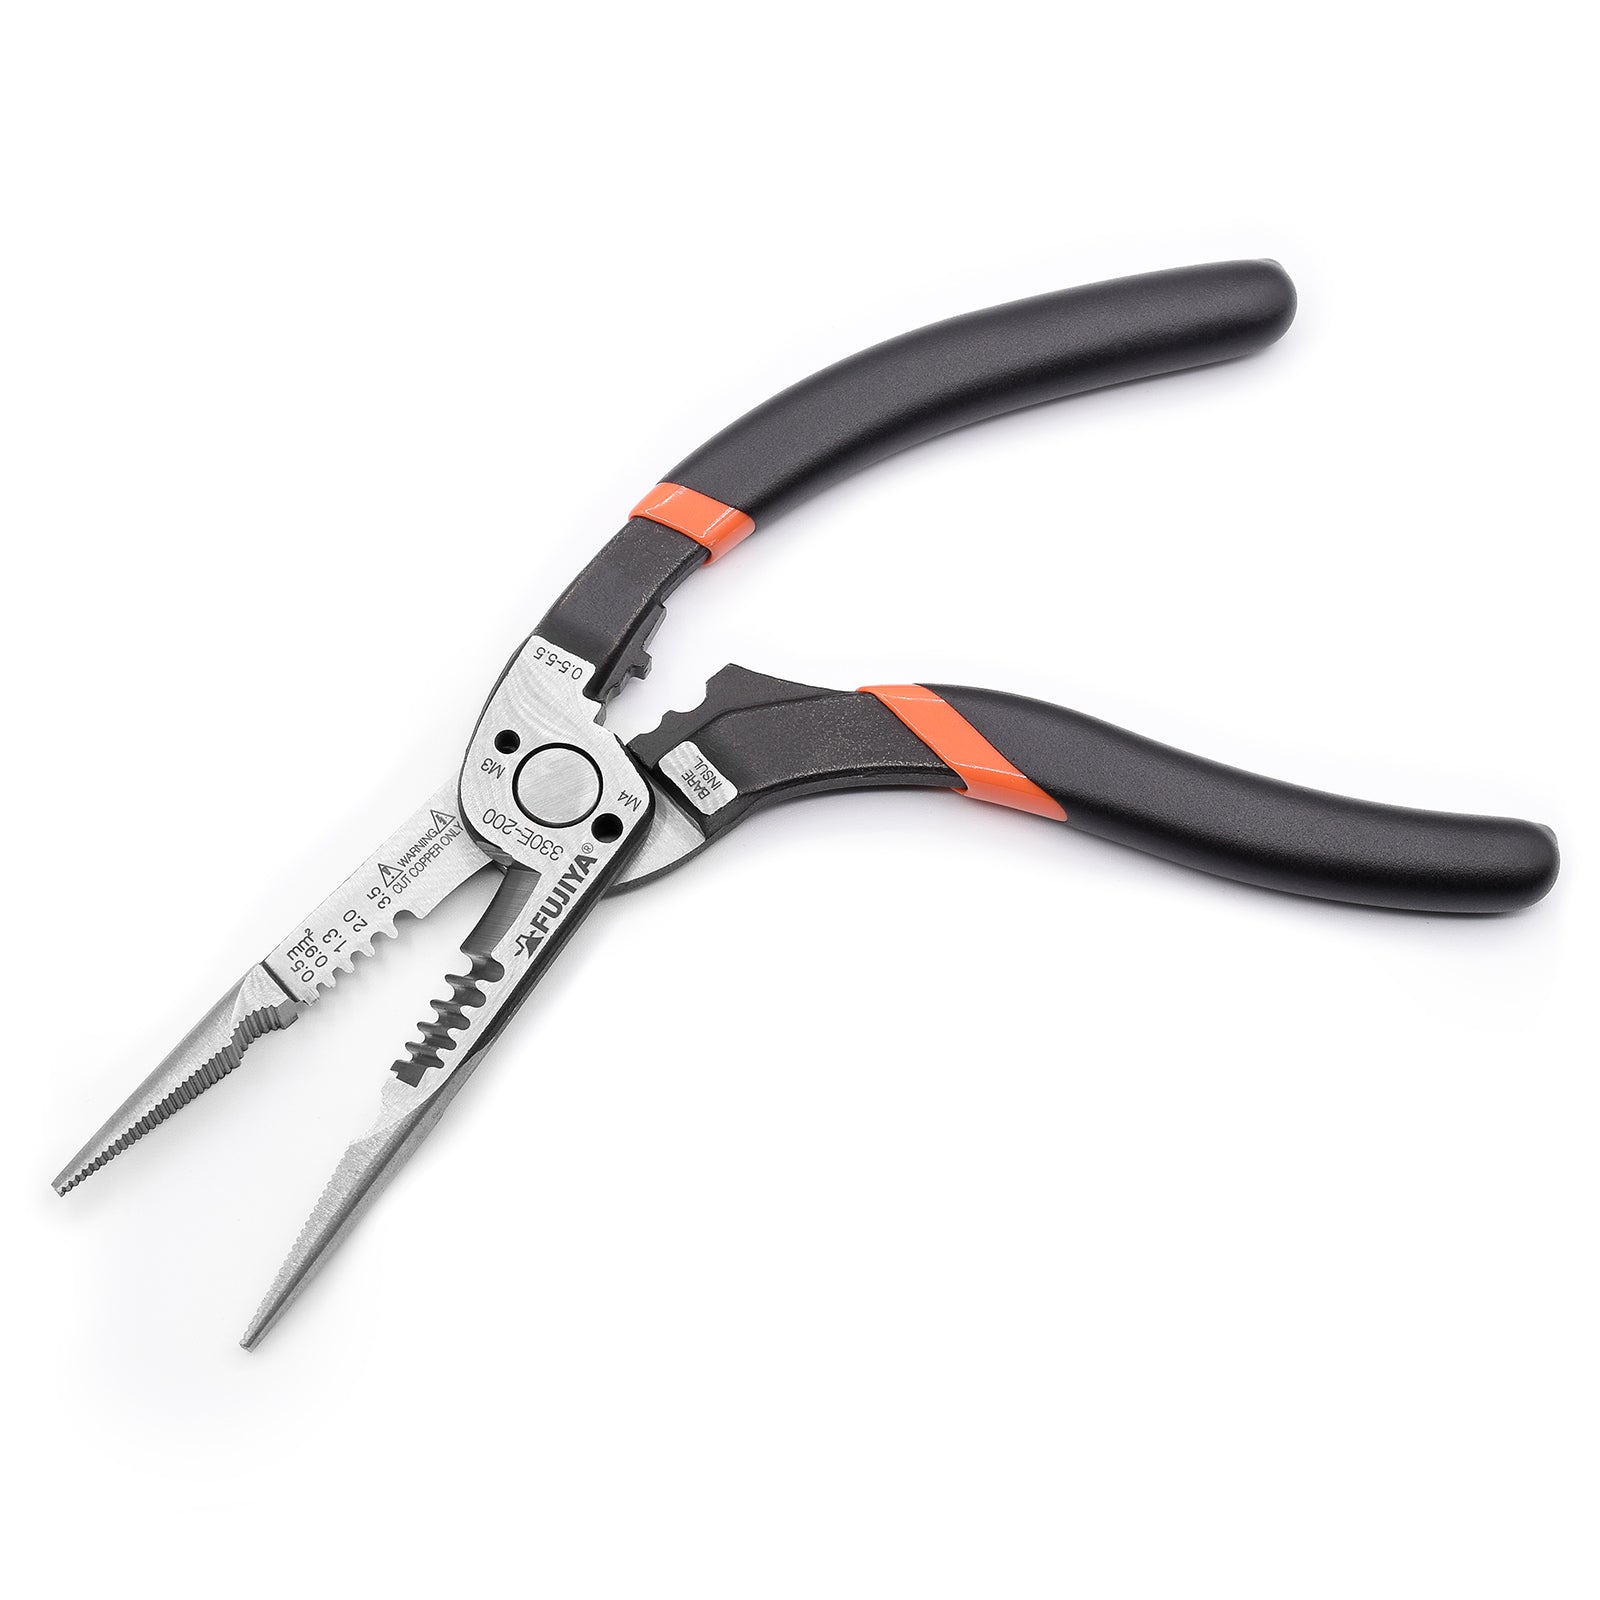 Fujiya Electrician's Plier with Ergonomic Curved Handles